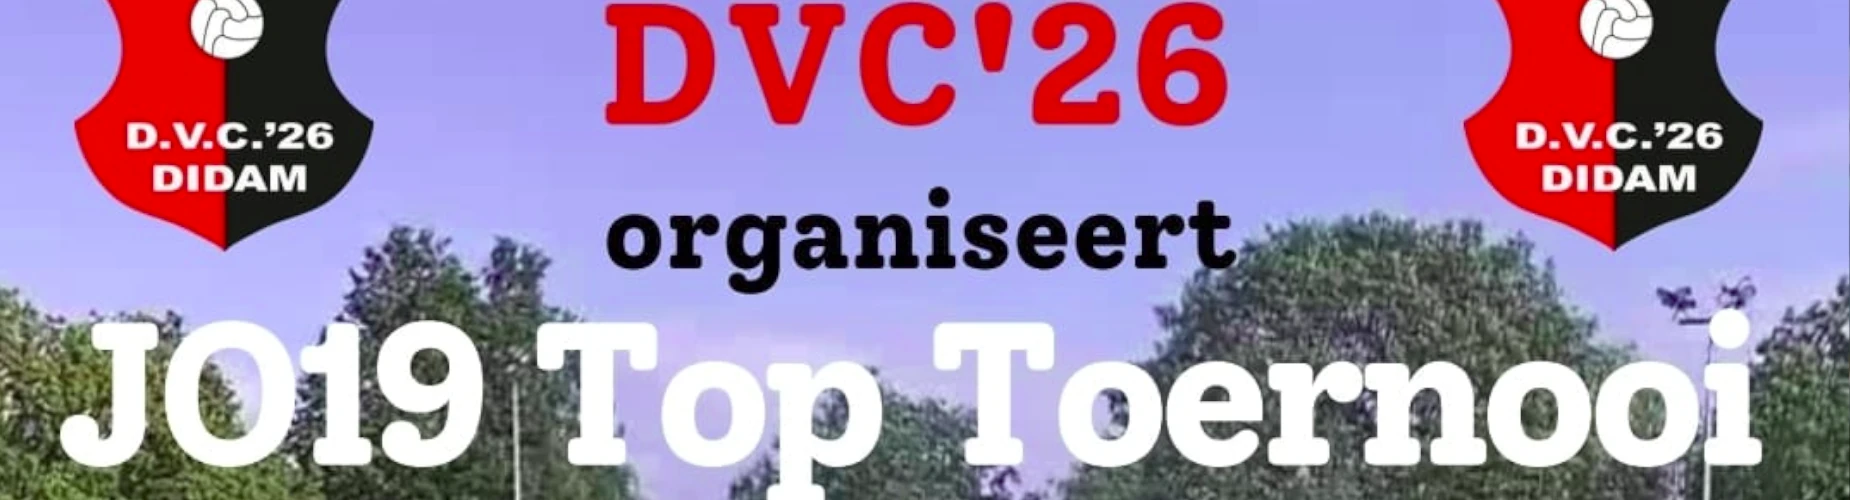 Banner - JO19 TOP Toernooi - DVC’26 - Didam